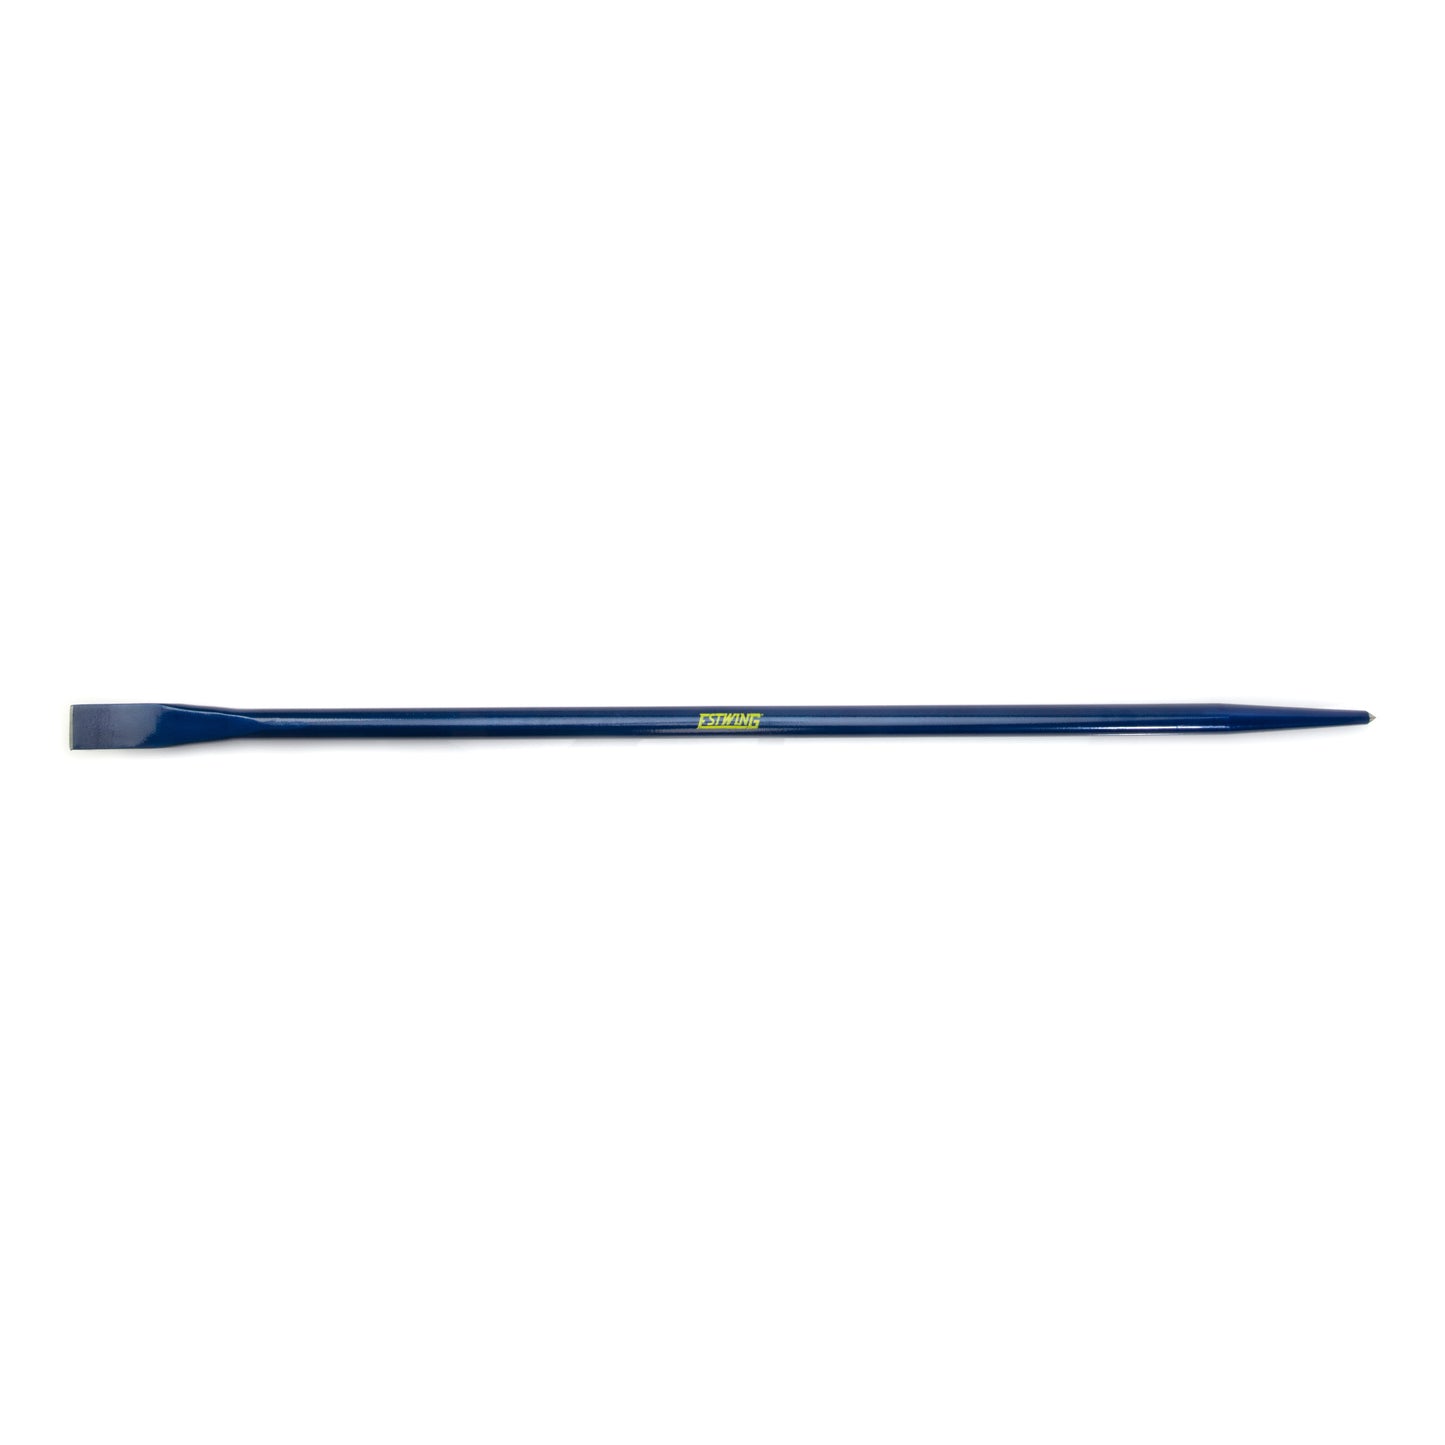 36-Inch Chisel-End Round Alignment Bar